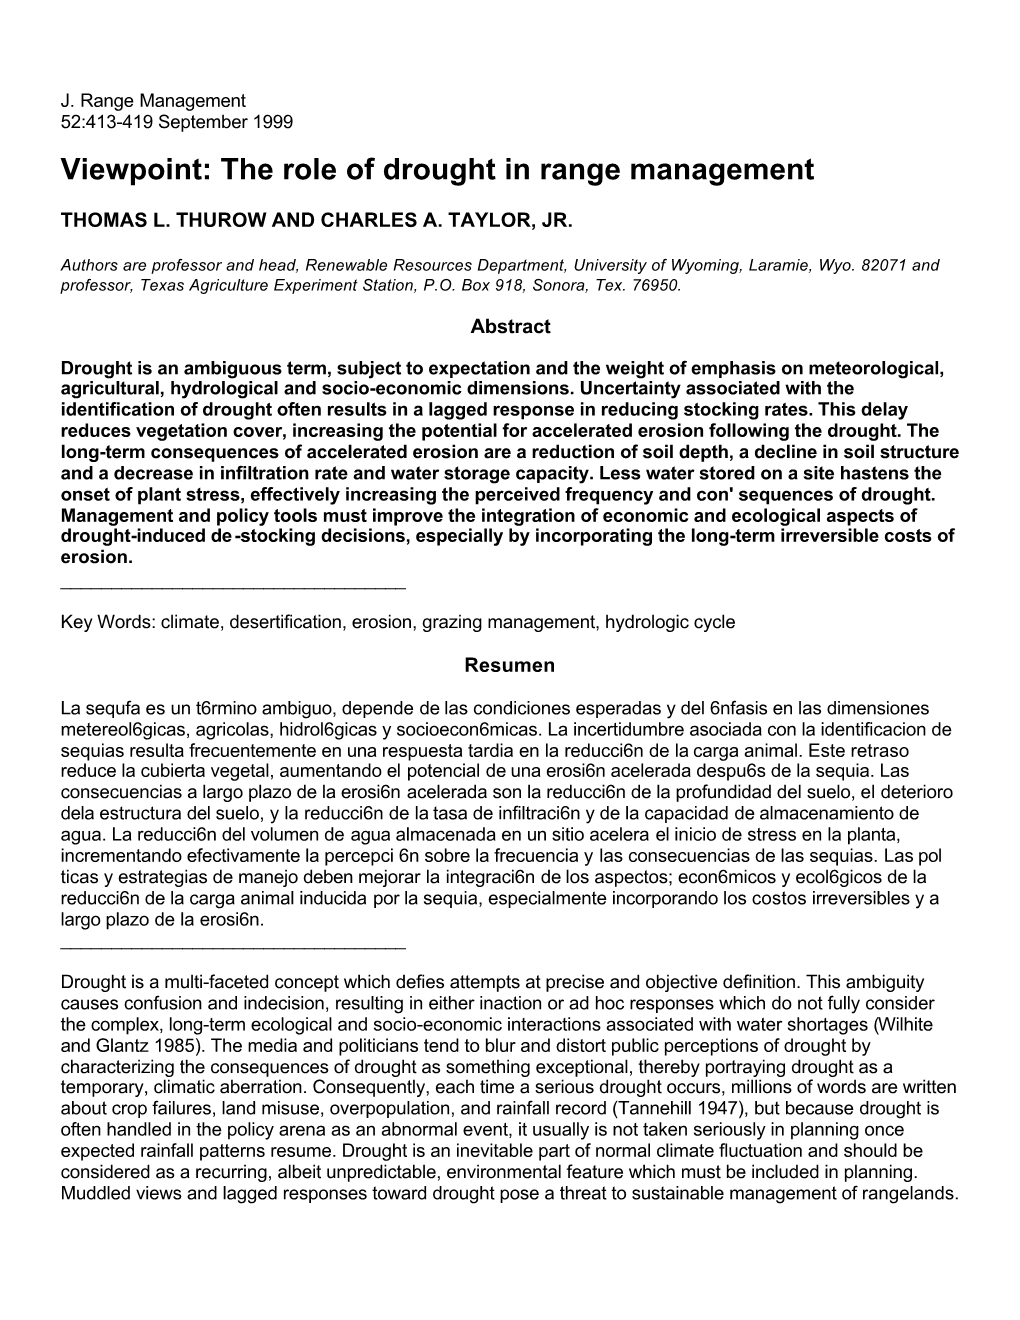 Viewpoint: the Role of Drought in Range Management